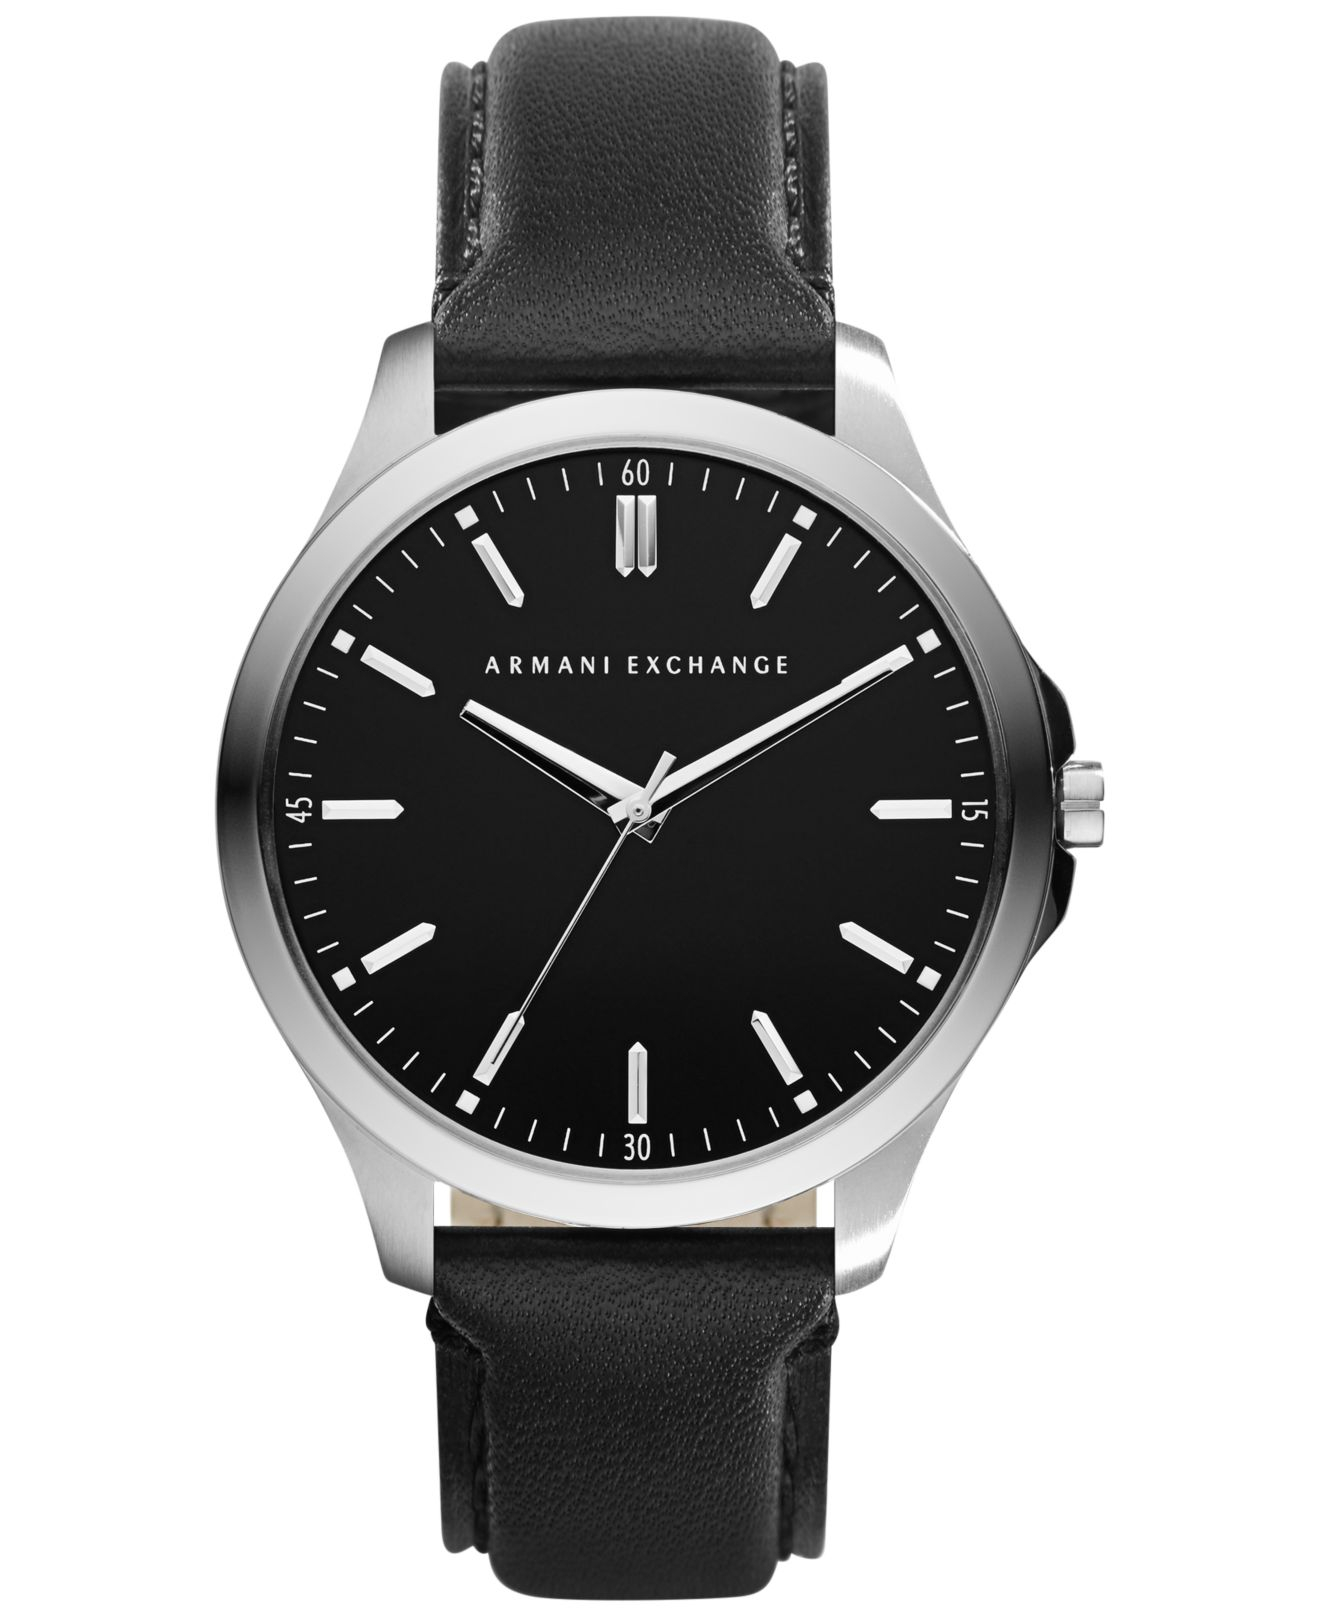 Armani exchange A|x Men's Black Leather Strap Watch 45mm Ax2149 in ...